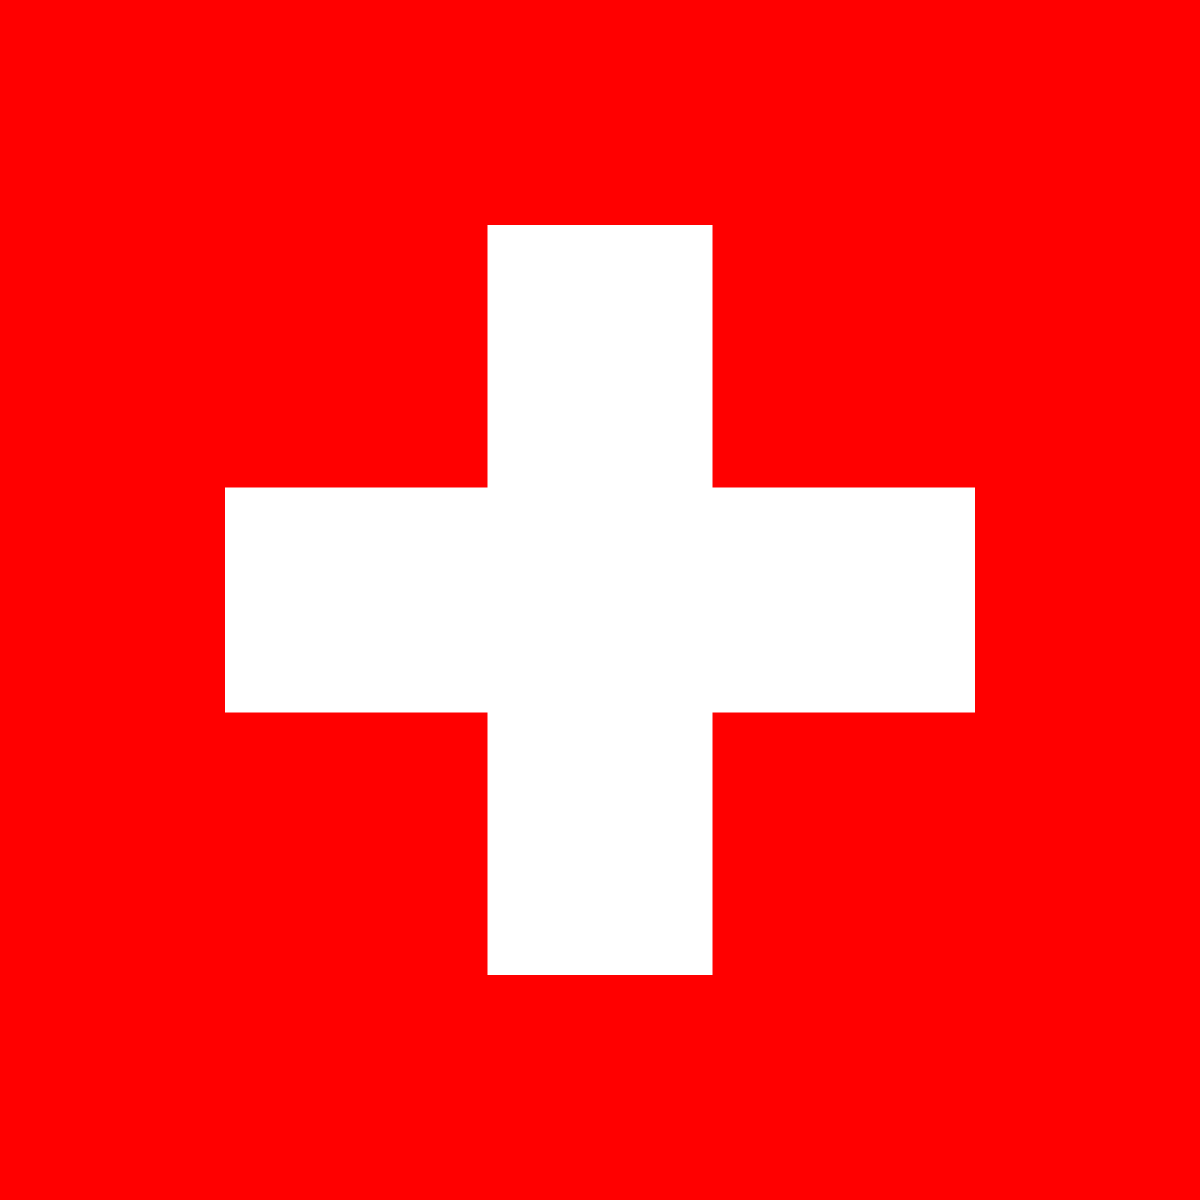 The flag of Switzerland. White cross in red